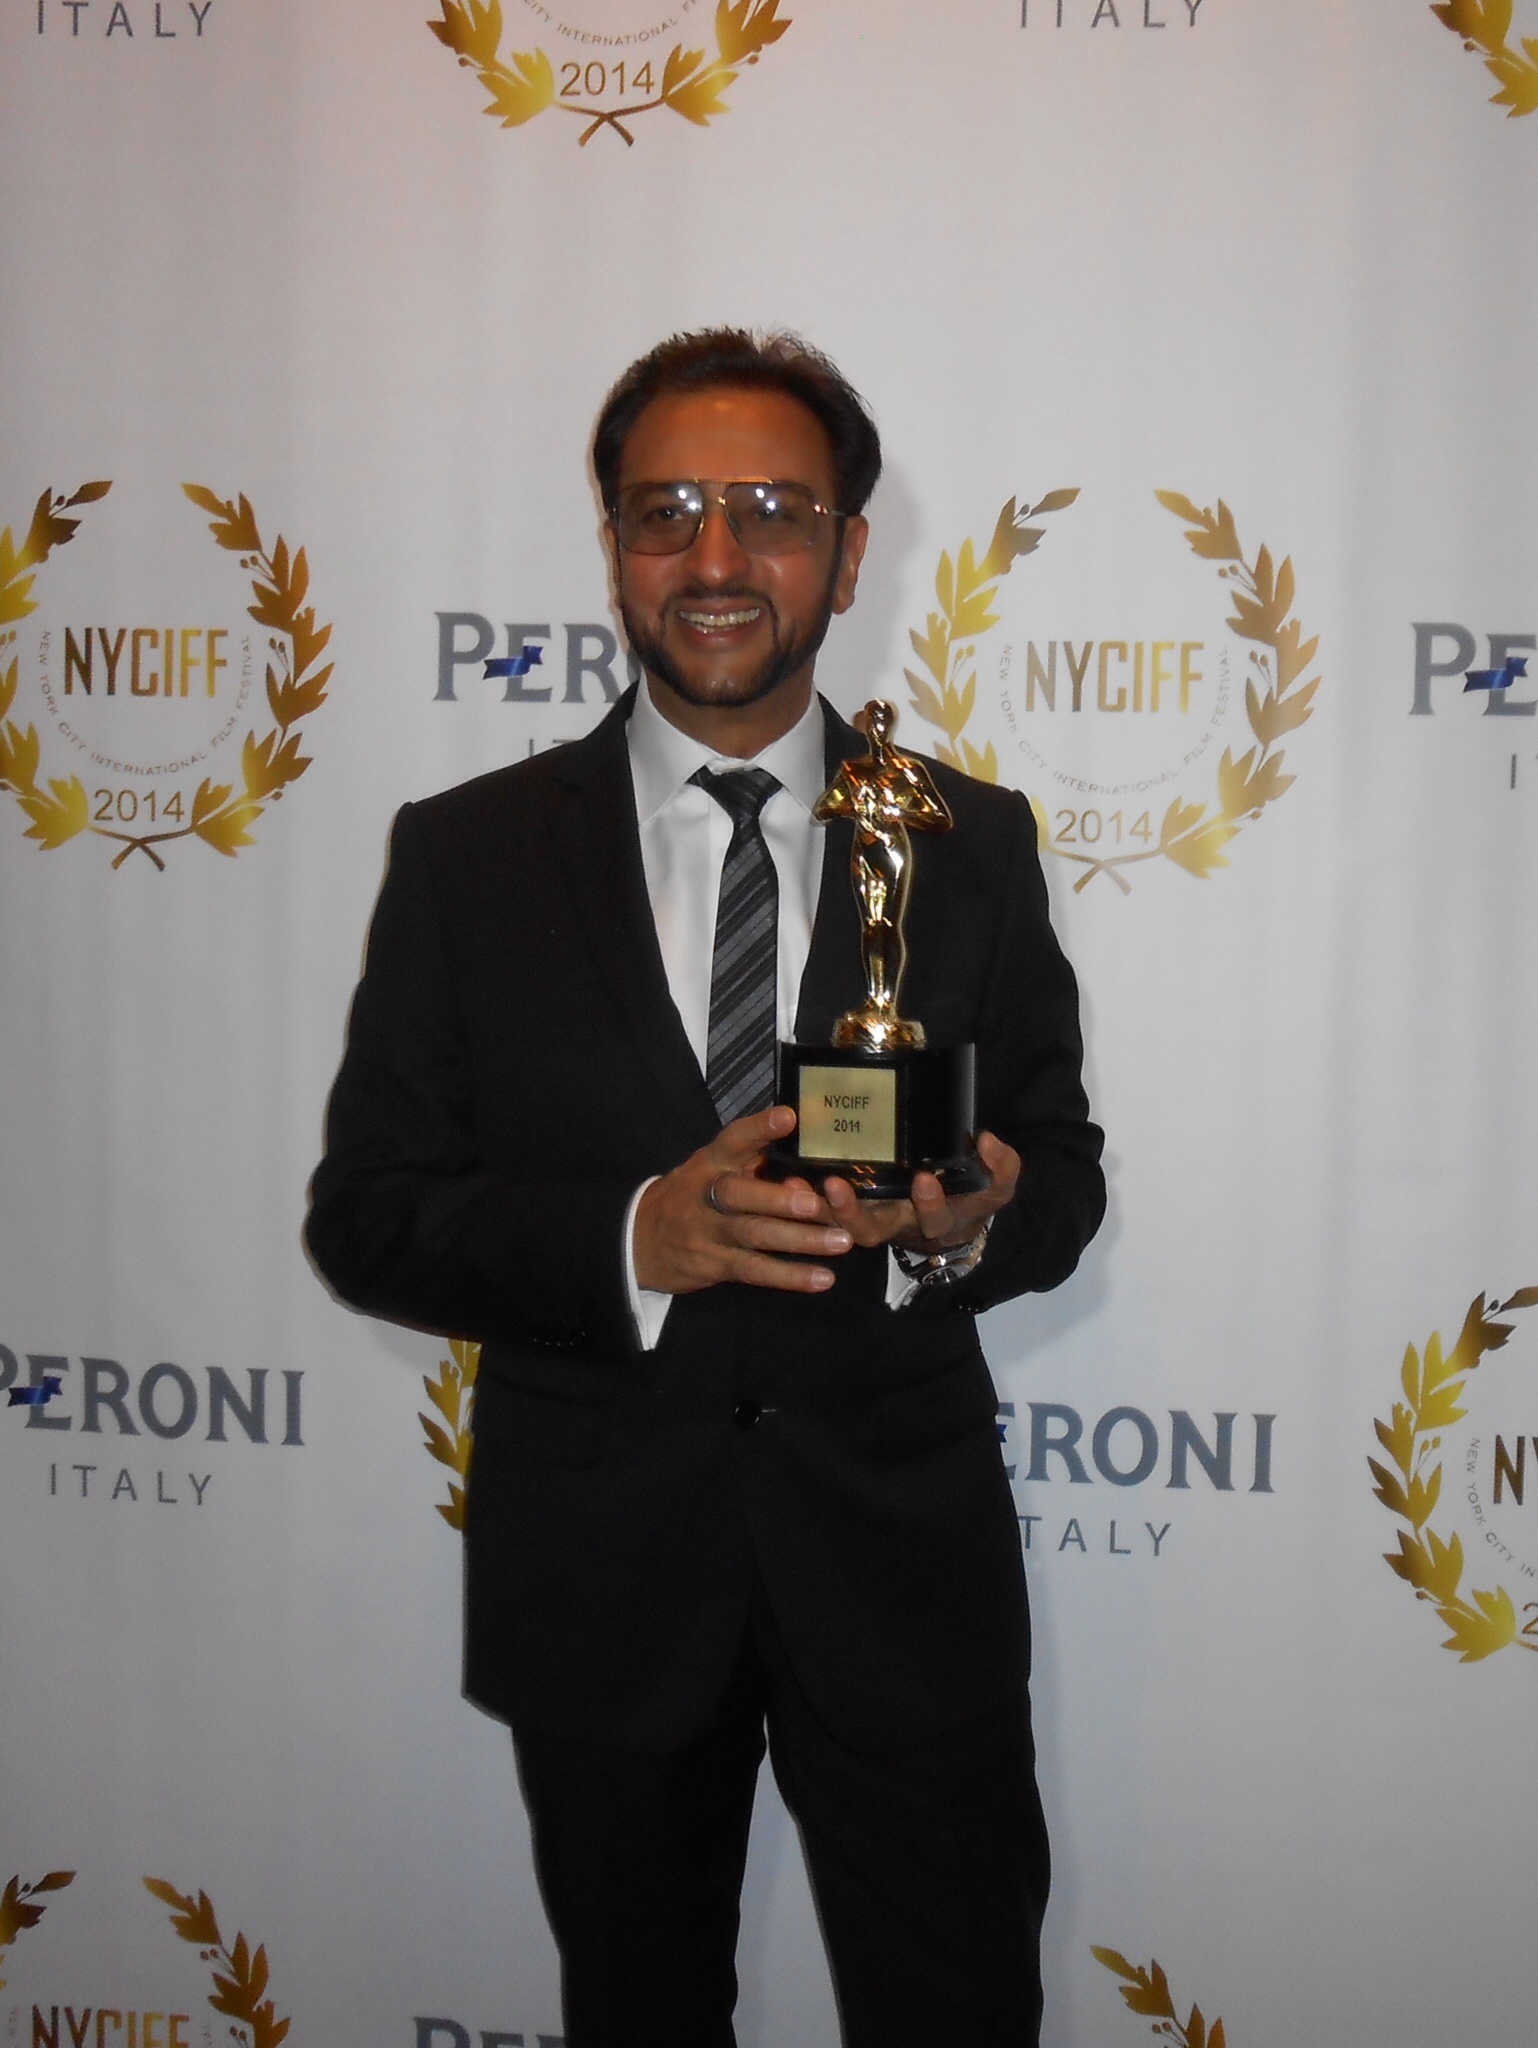 Gulshan Grover at NYCIFF 2014 awarded foroutstanding work as an actor across continents, bringing synergy between Indian and American cinema and promoting Bollywood films in the U.S.A.